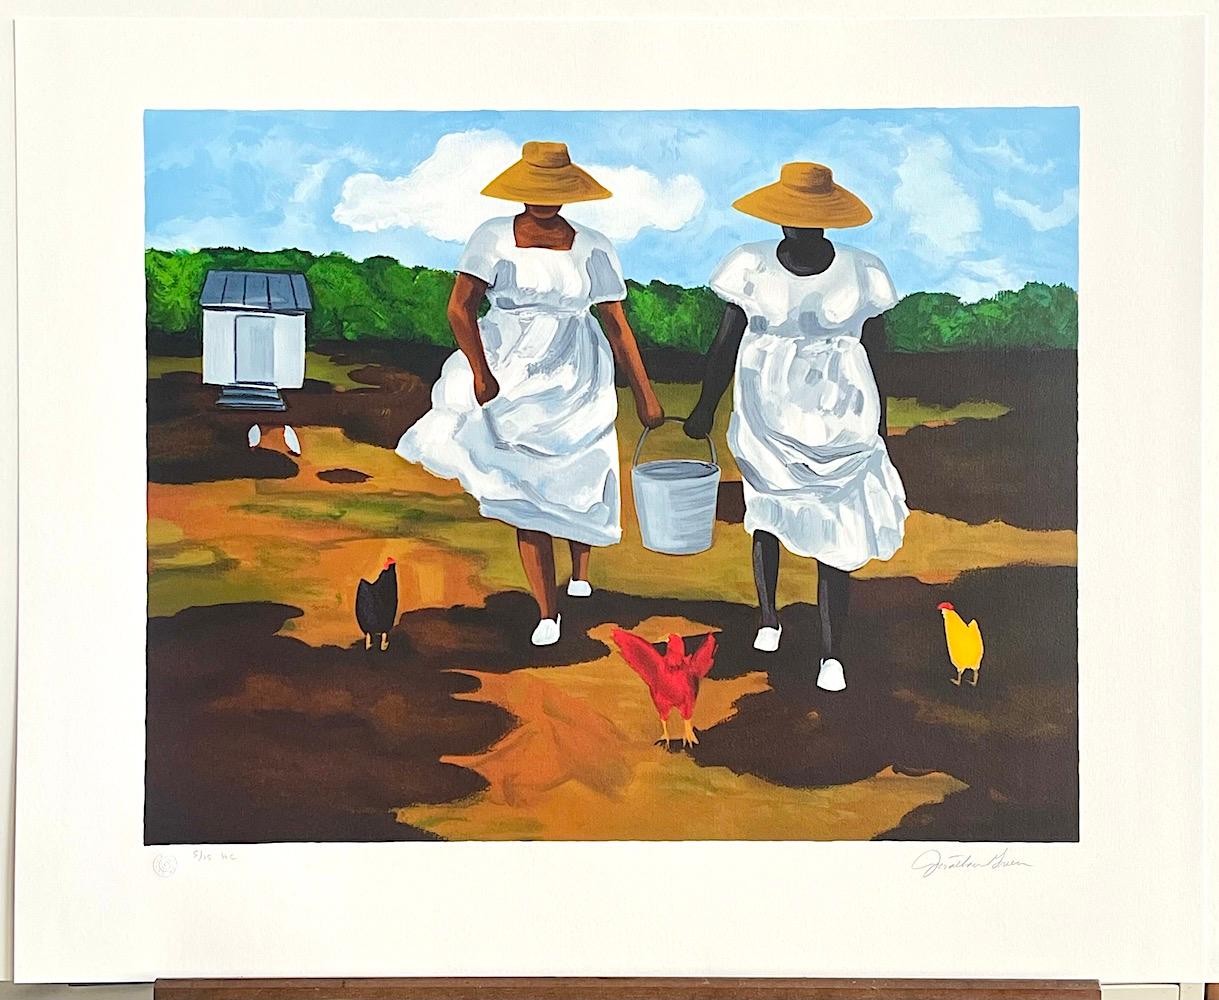 SHARING THE CHORES is a hand drawn, limited edition lithograph by the African American artist JONATHAN GREEN printed using hand lithography techniques on archival Arches paper, 100% acid free. SHARING THE CHORES is a simple rural landscape